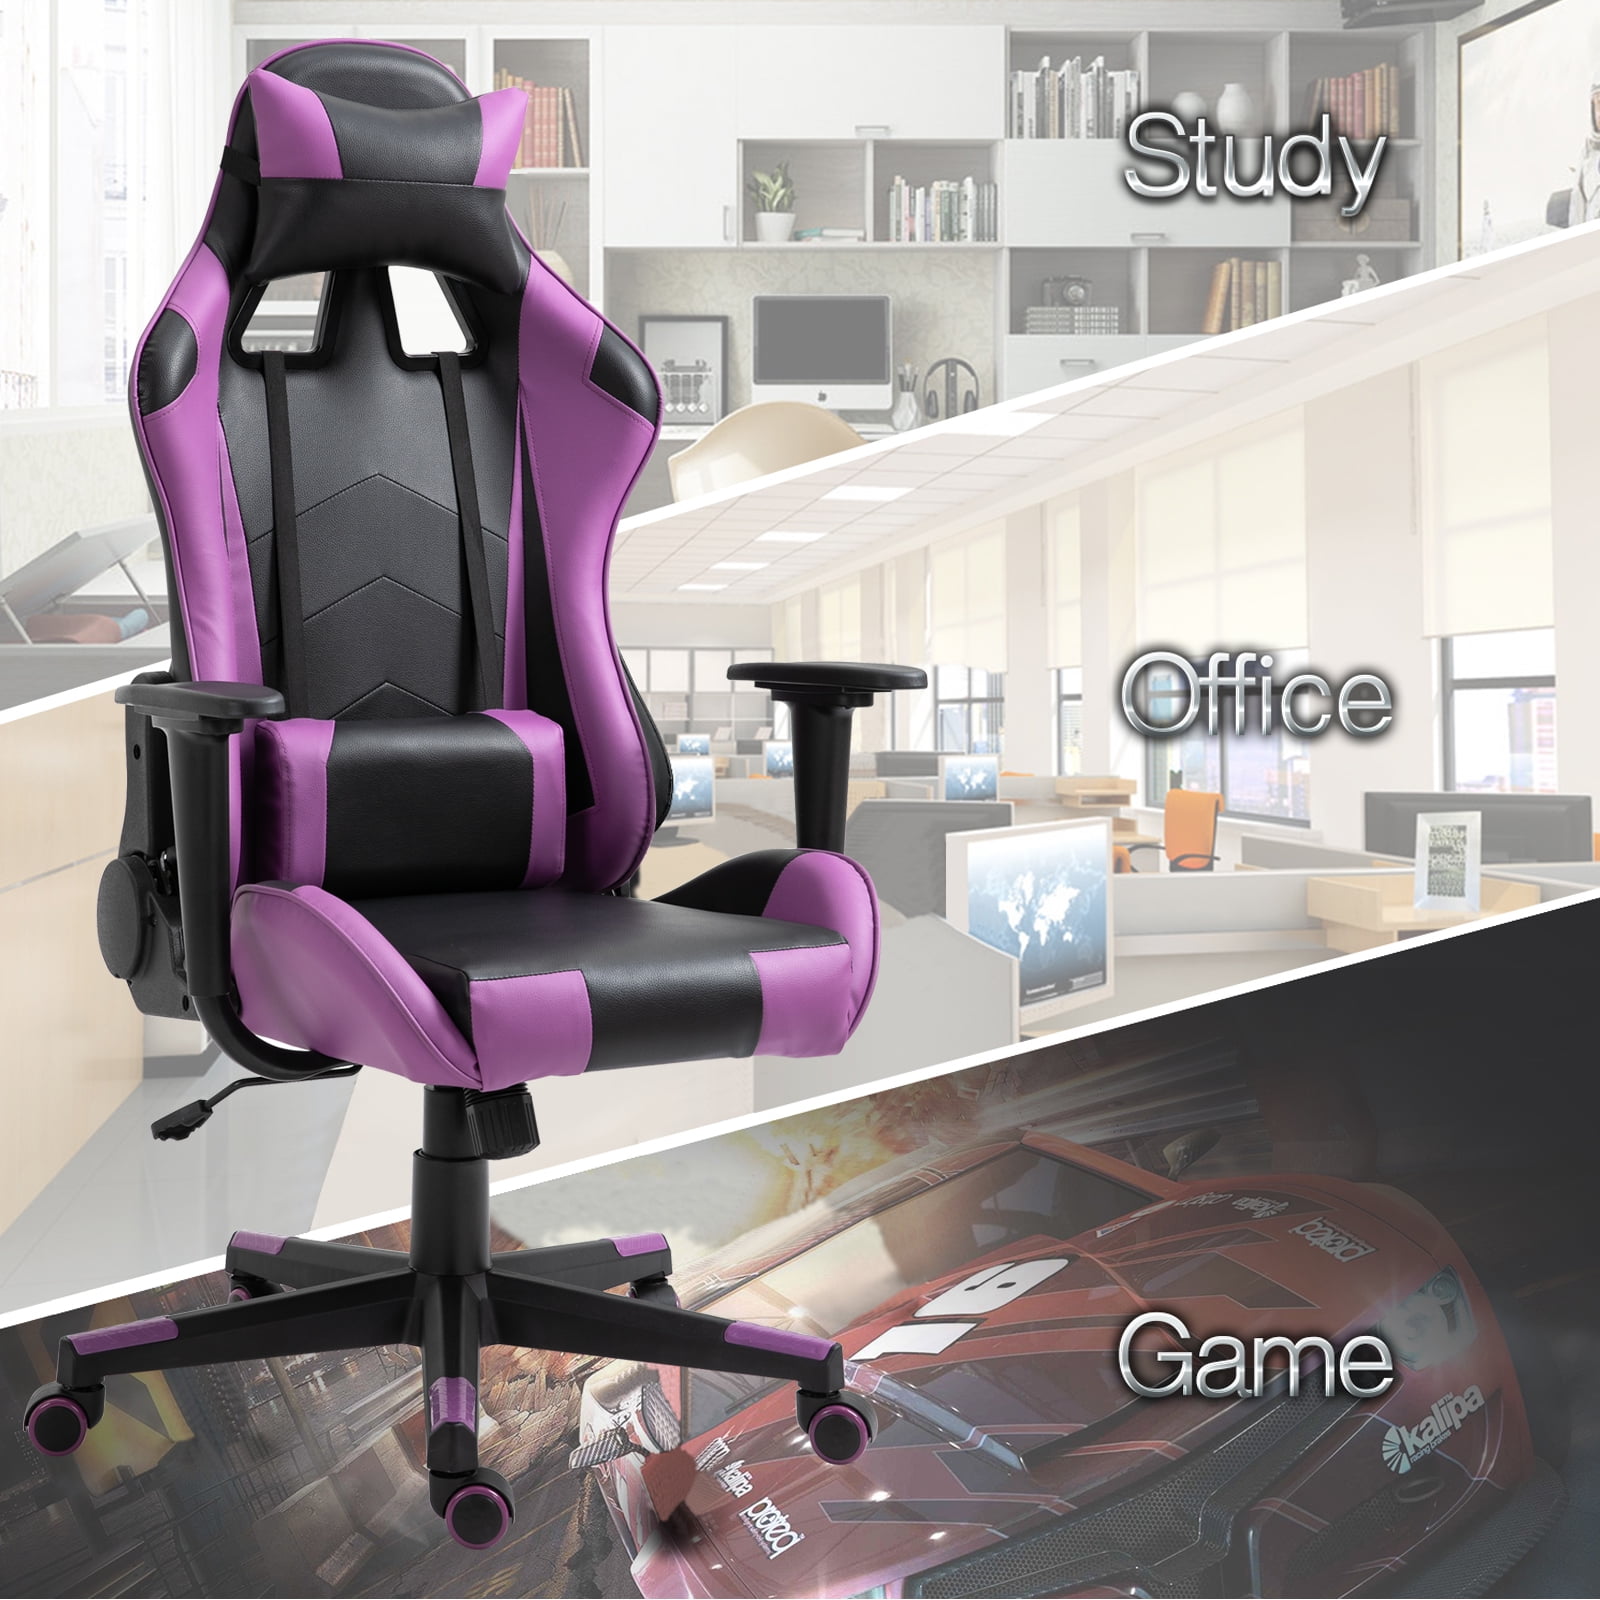 Including Headrest and Lumbar Support 2020 Upgrade Ergonomic and Swivel Office Game Chair ILFALZT Gaming Chair - Heavy-Duty Recliner Leather Computer Chair With Padded Seat and Adjustable Armrest 